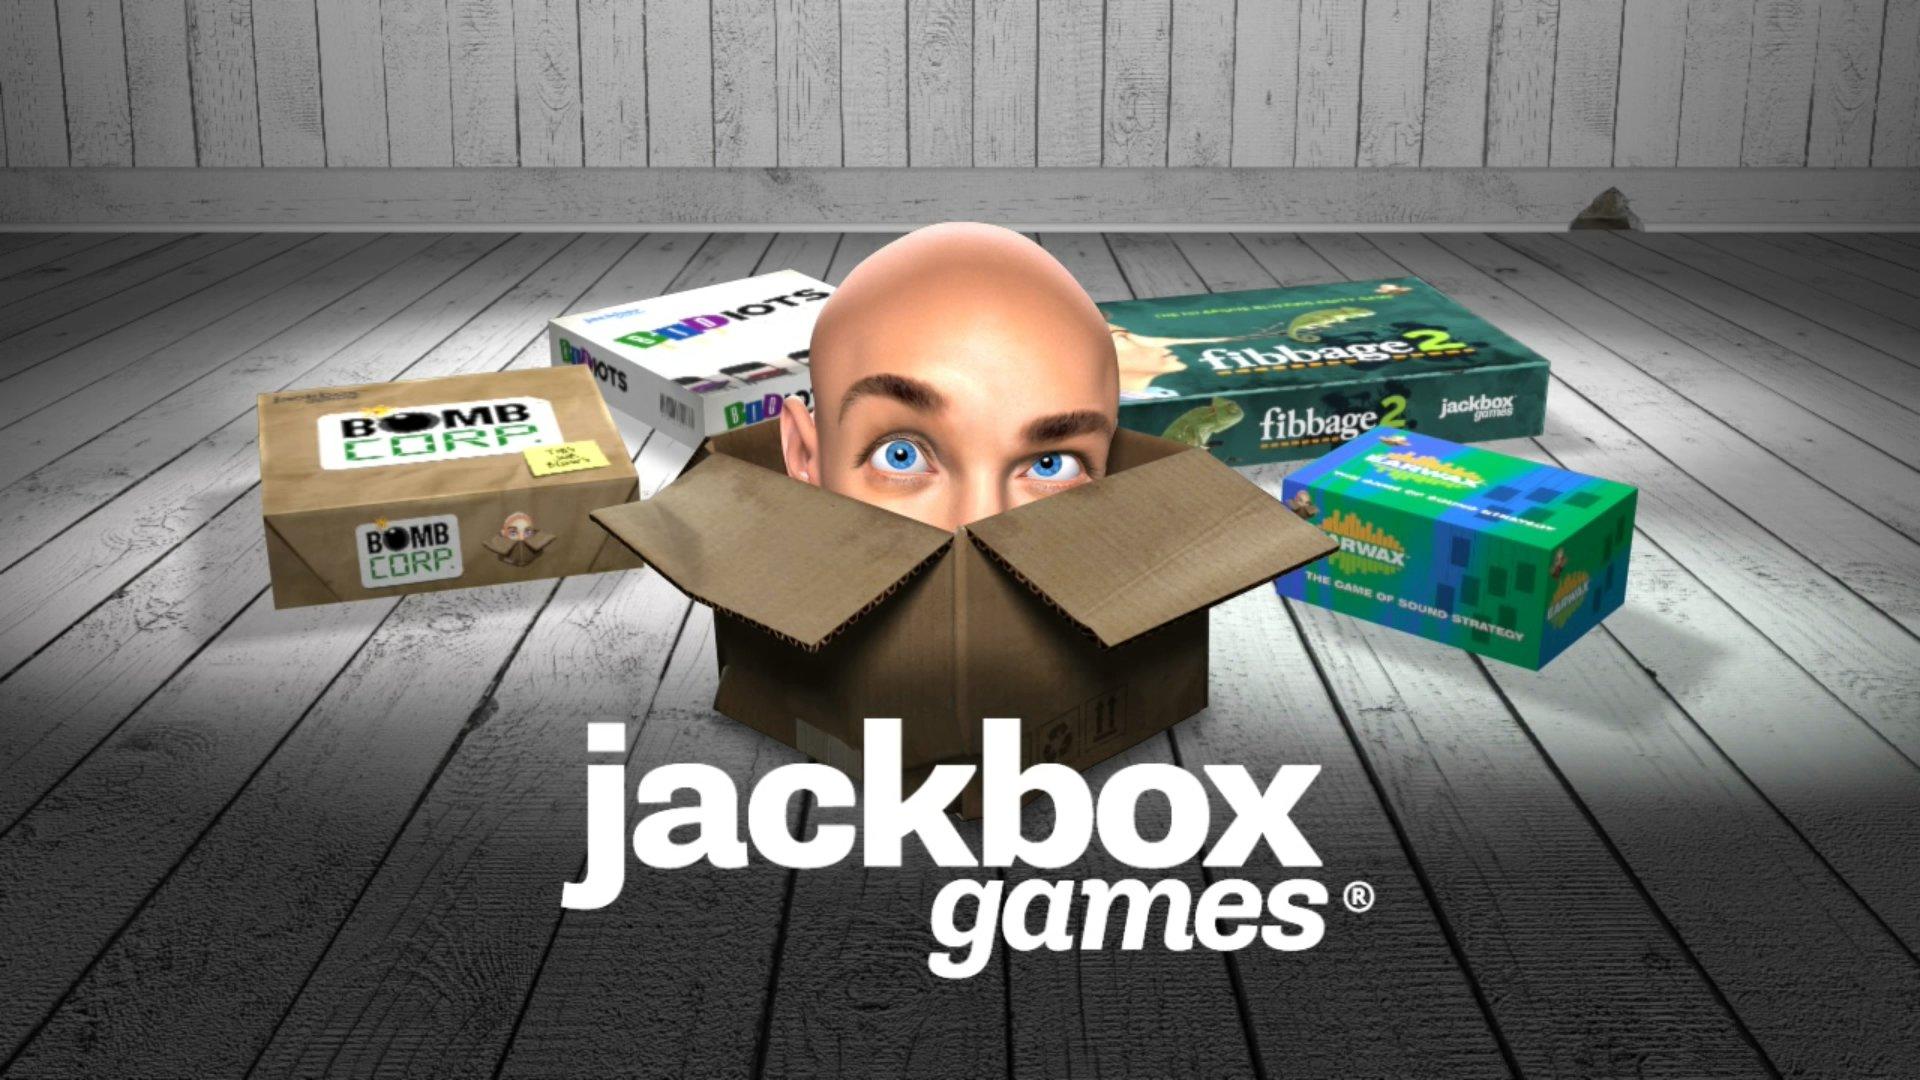 the jackbox party pack 4 free